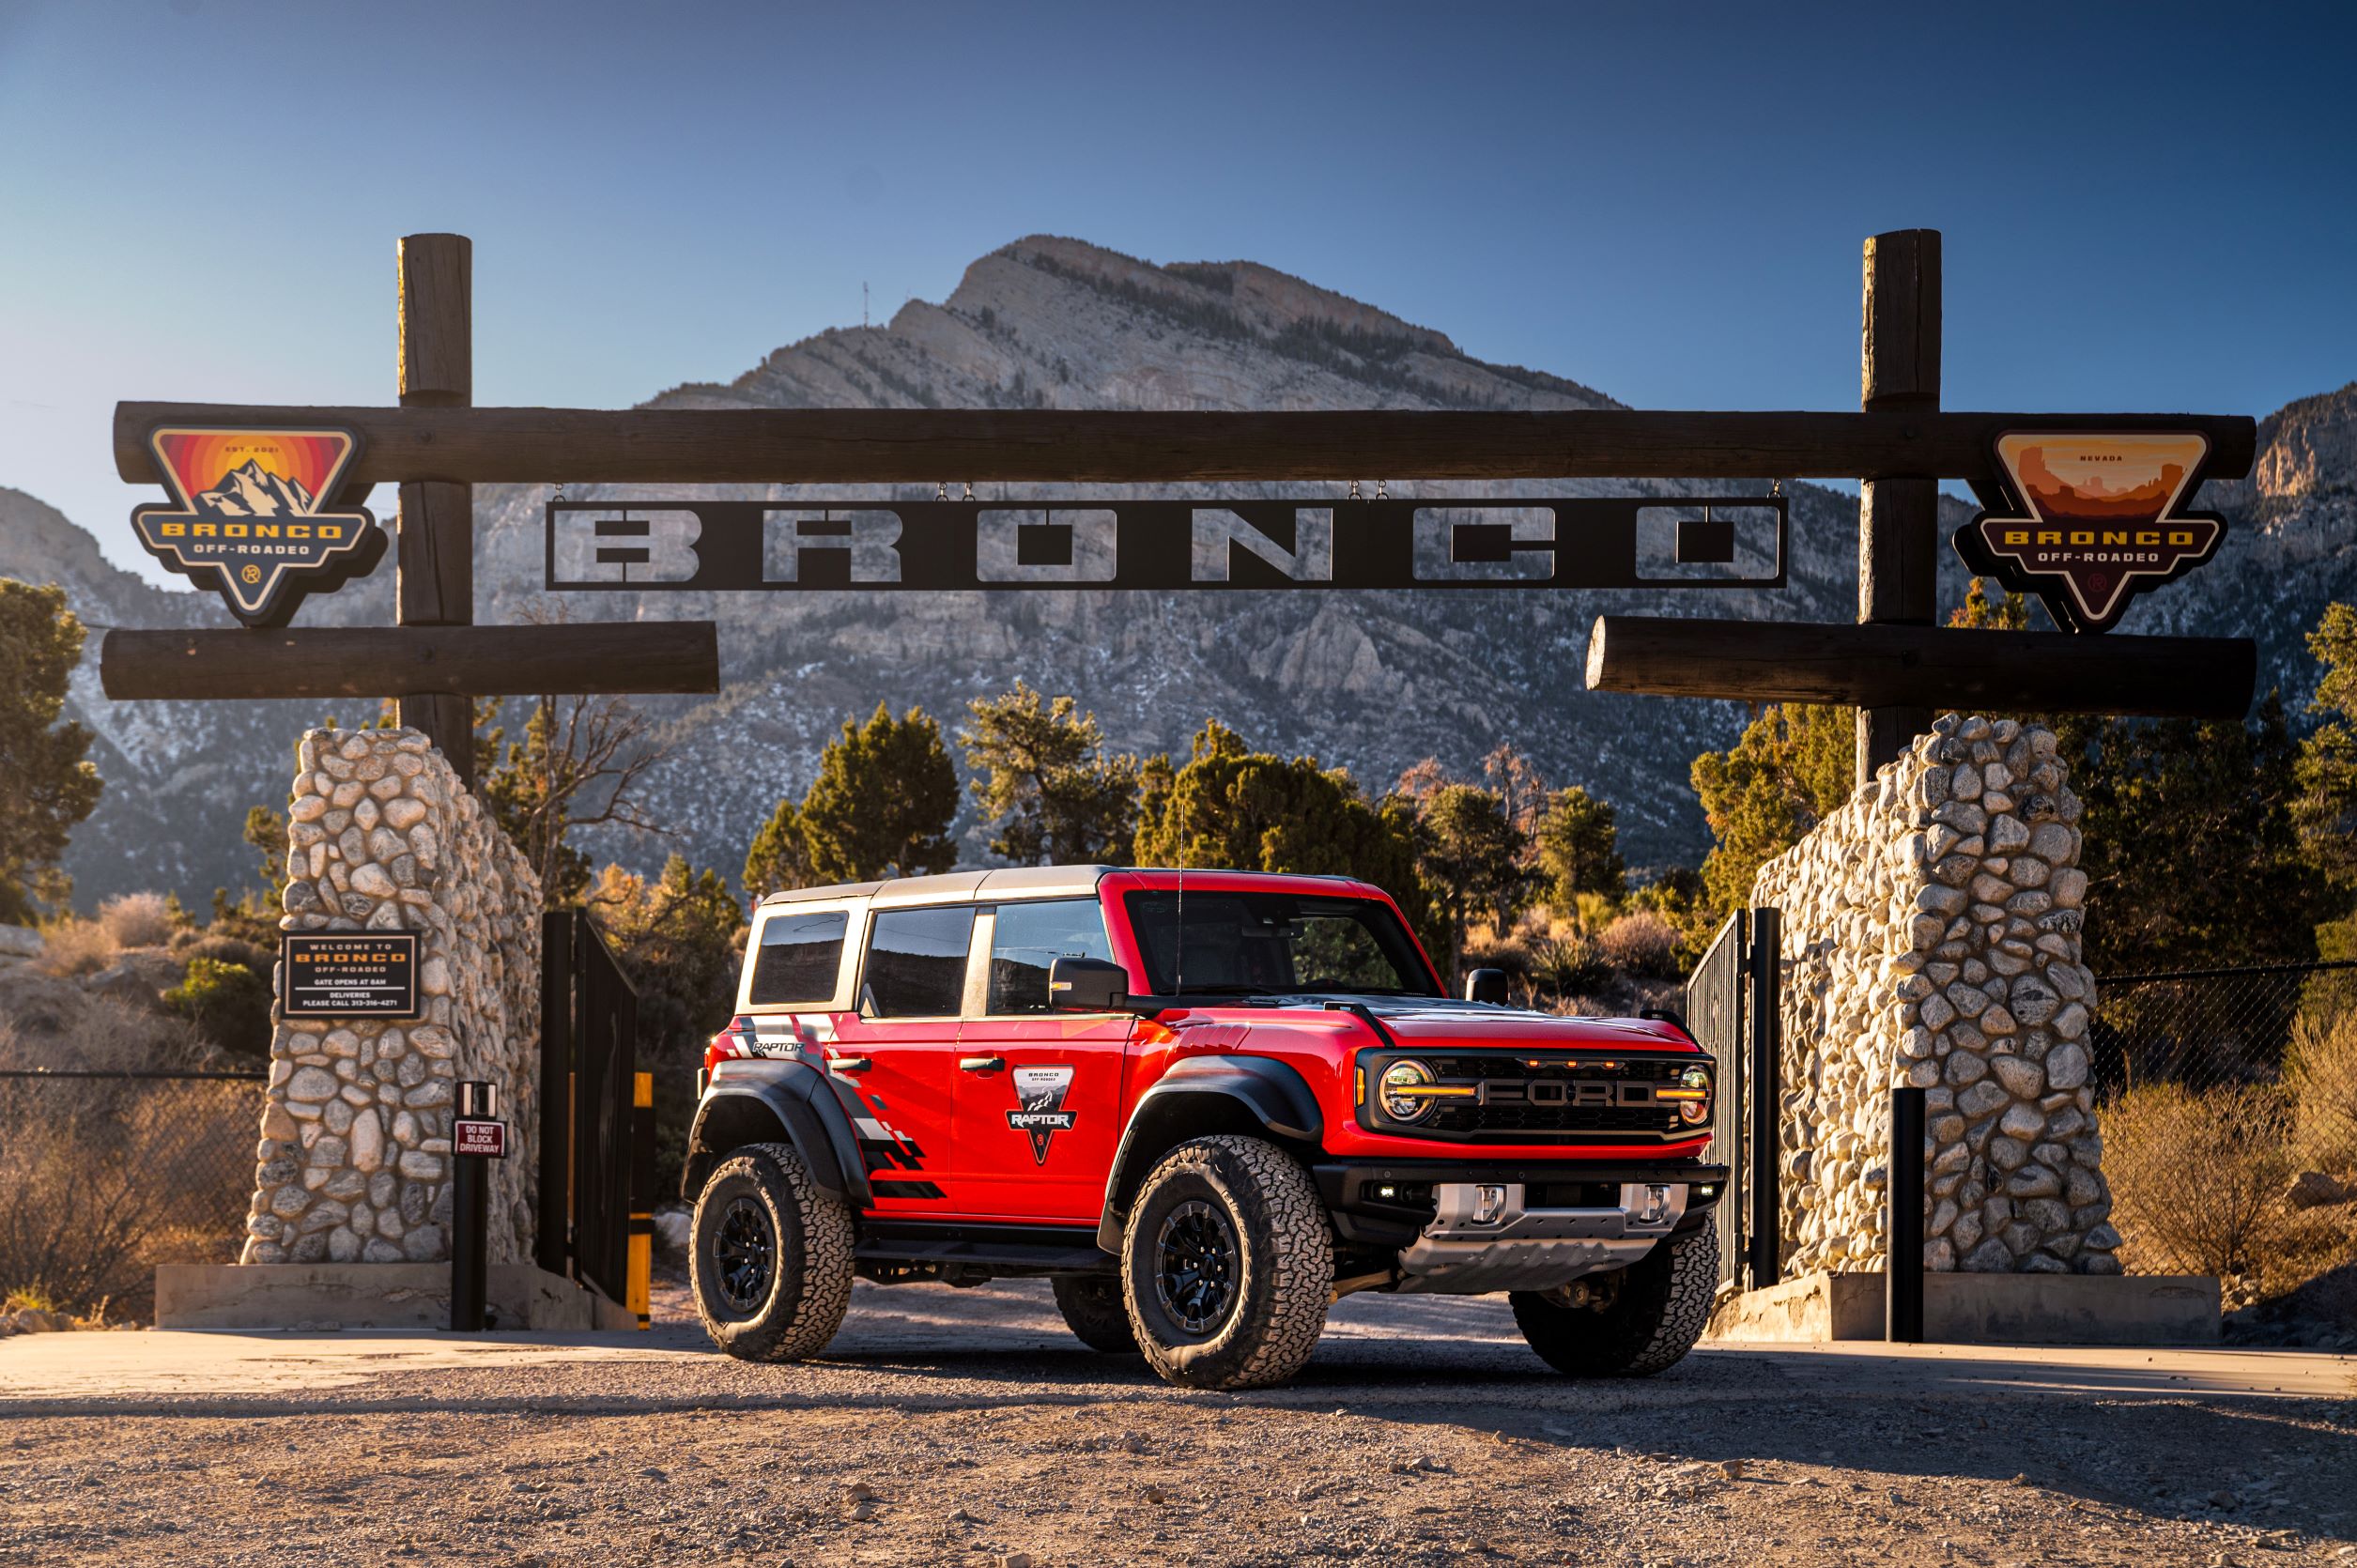 A red Ford Bronco Raptor pictured in front of the Ford Off-Roadeo School